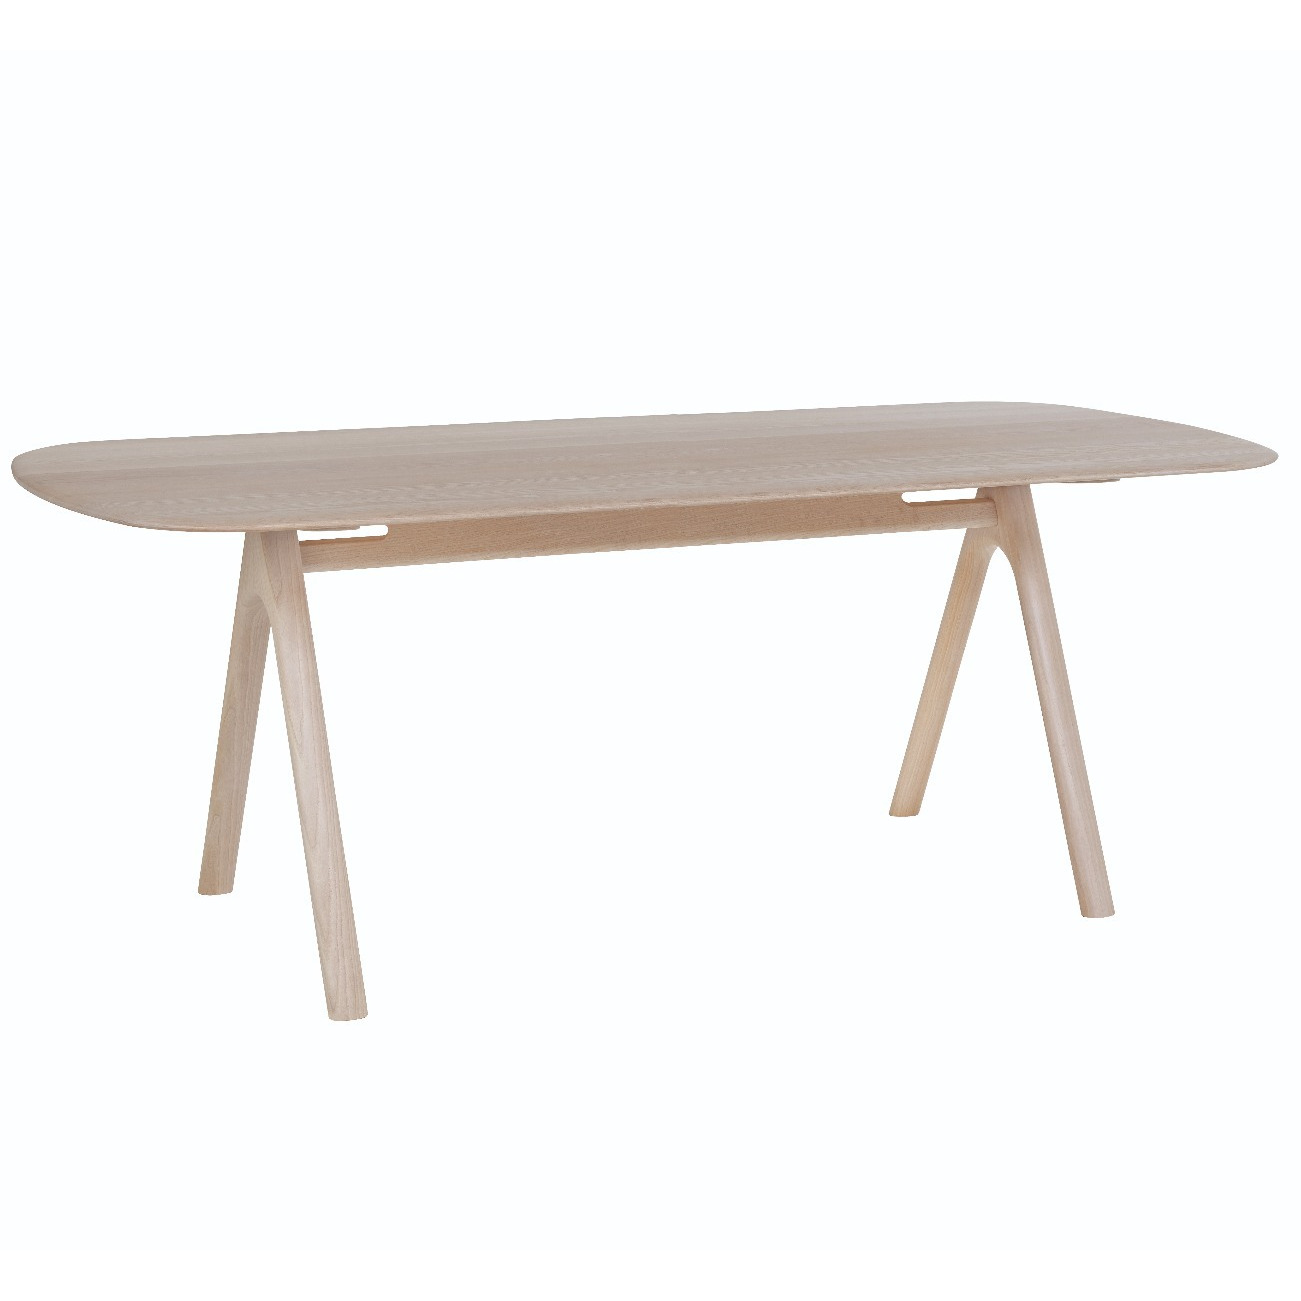 Ercol Corso Large Dining Table, Ash Wood - Barker & Stonehouse - image 1